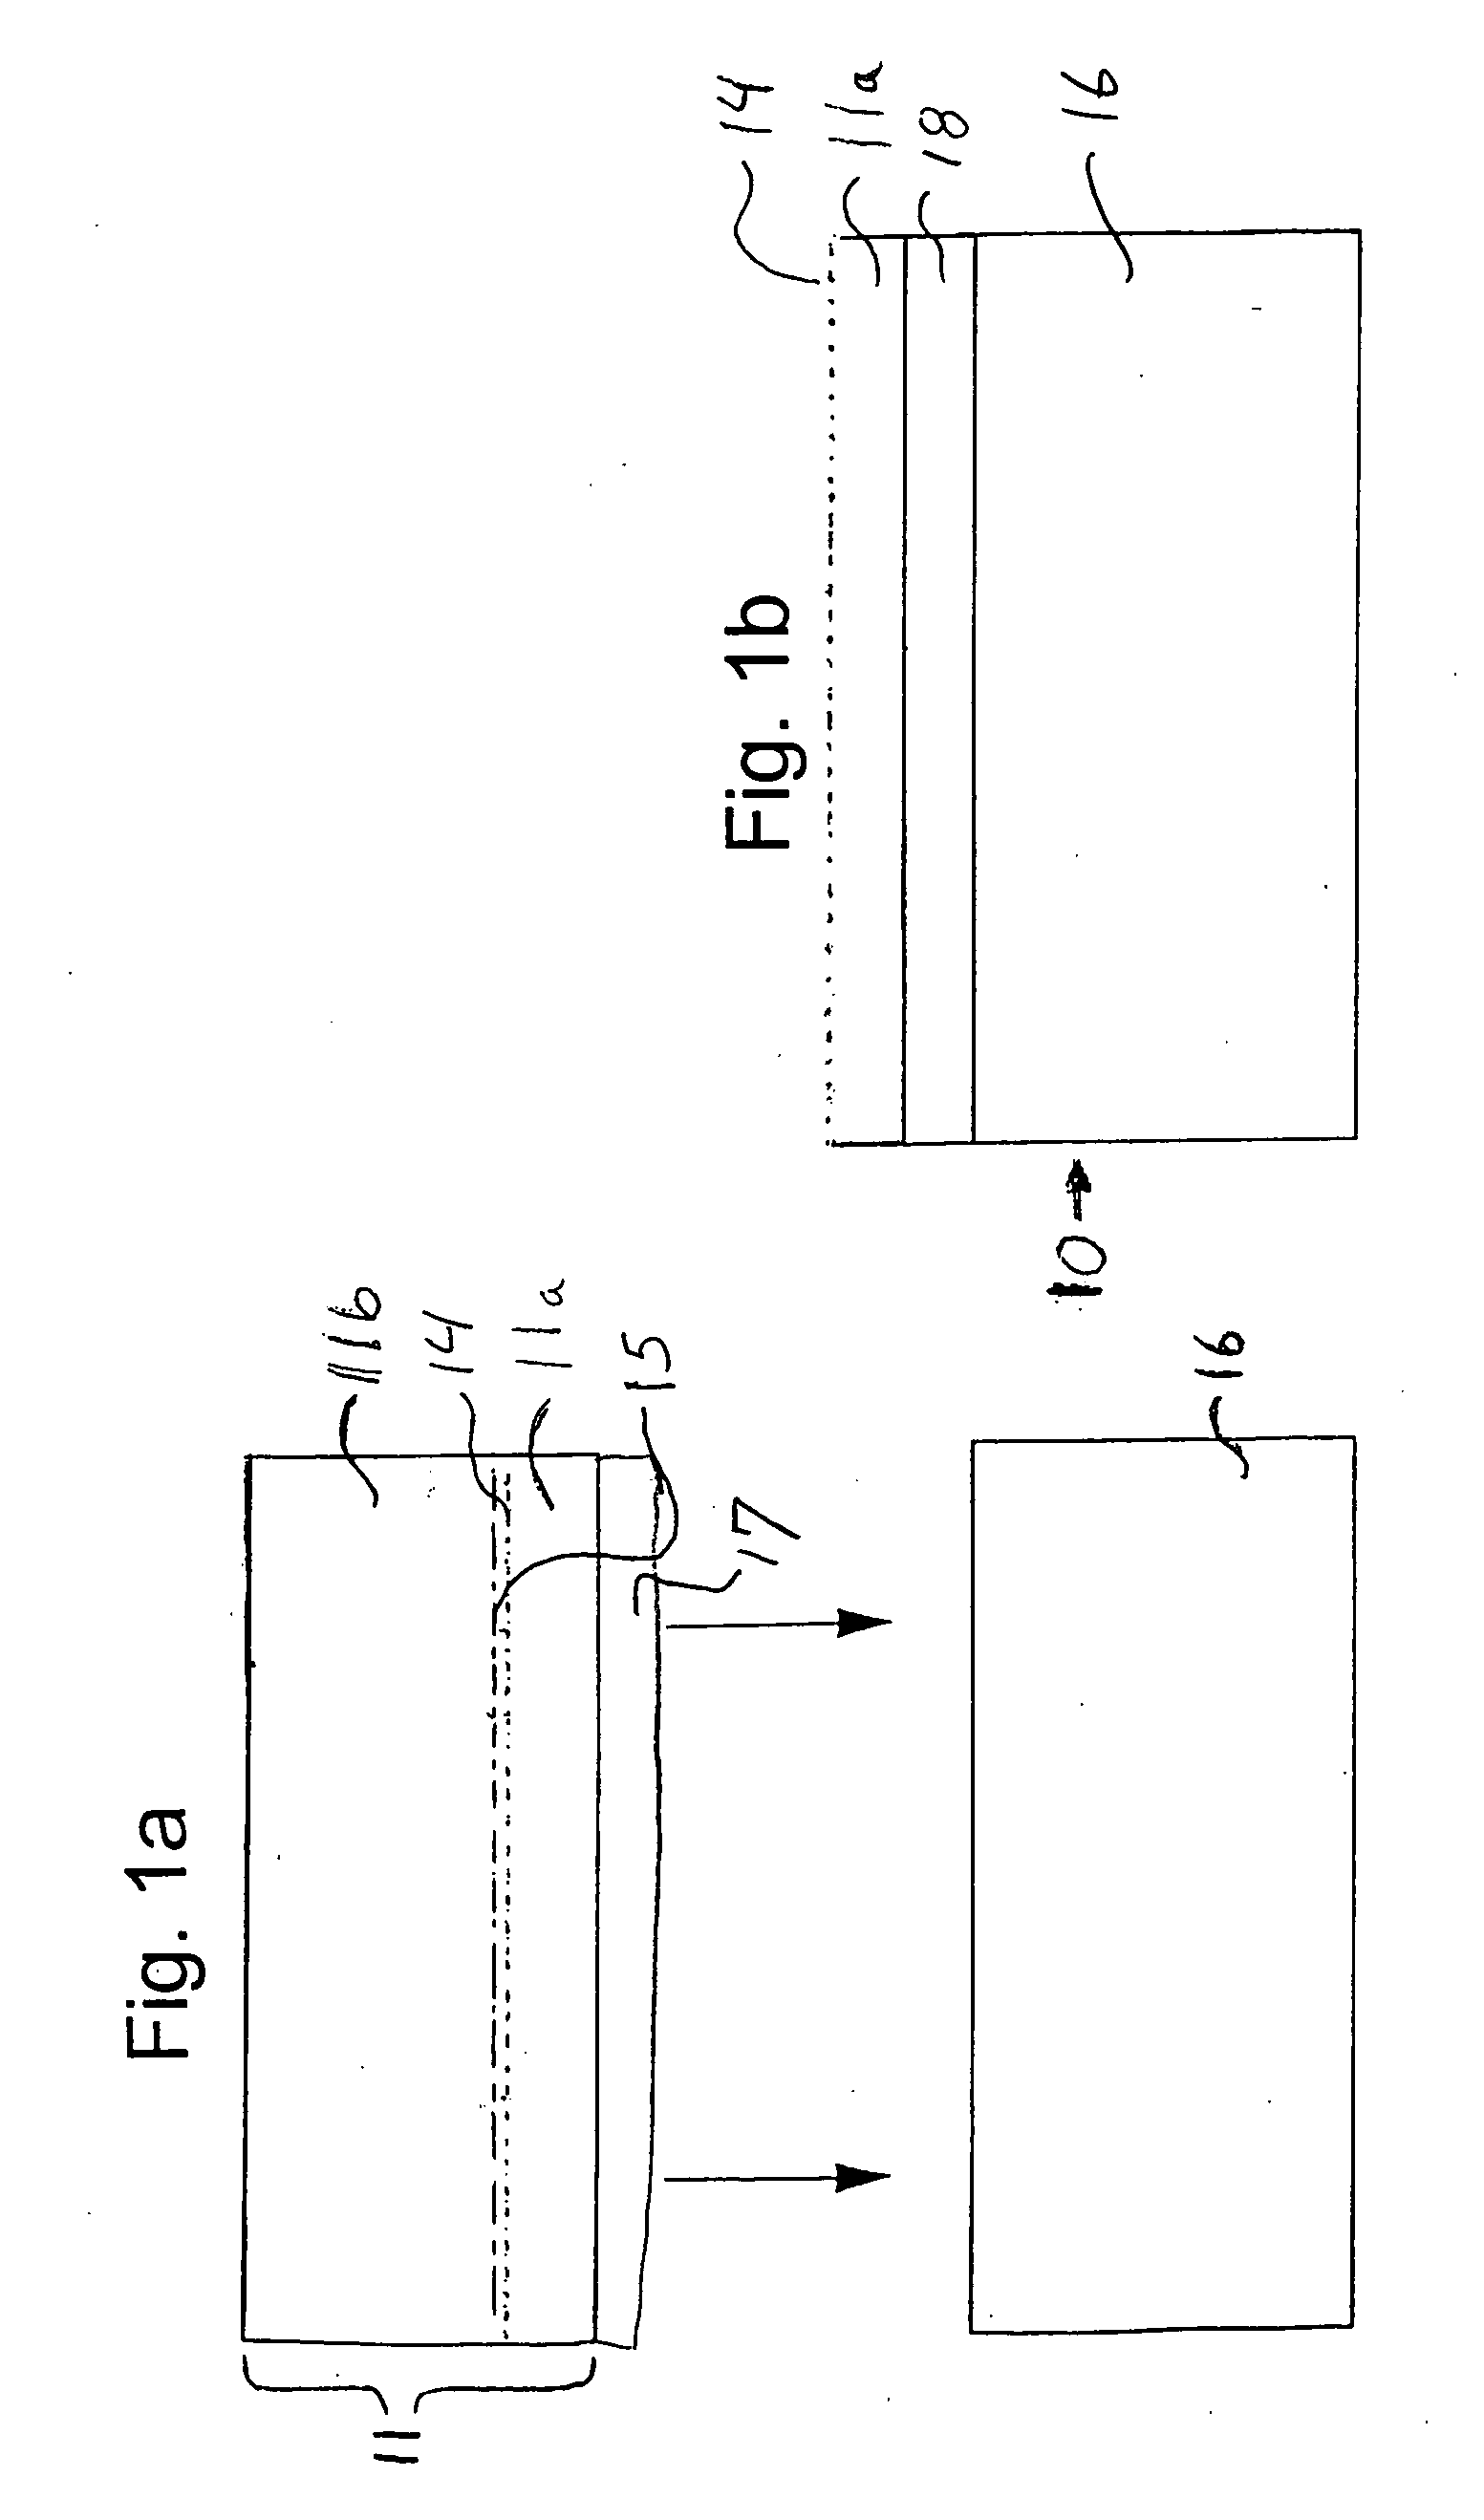 Method for transferring thin film layer material to a flexible substrate using a hydrogen ion splitting technique